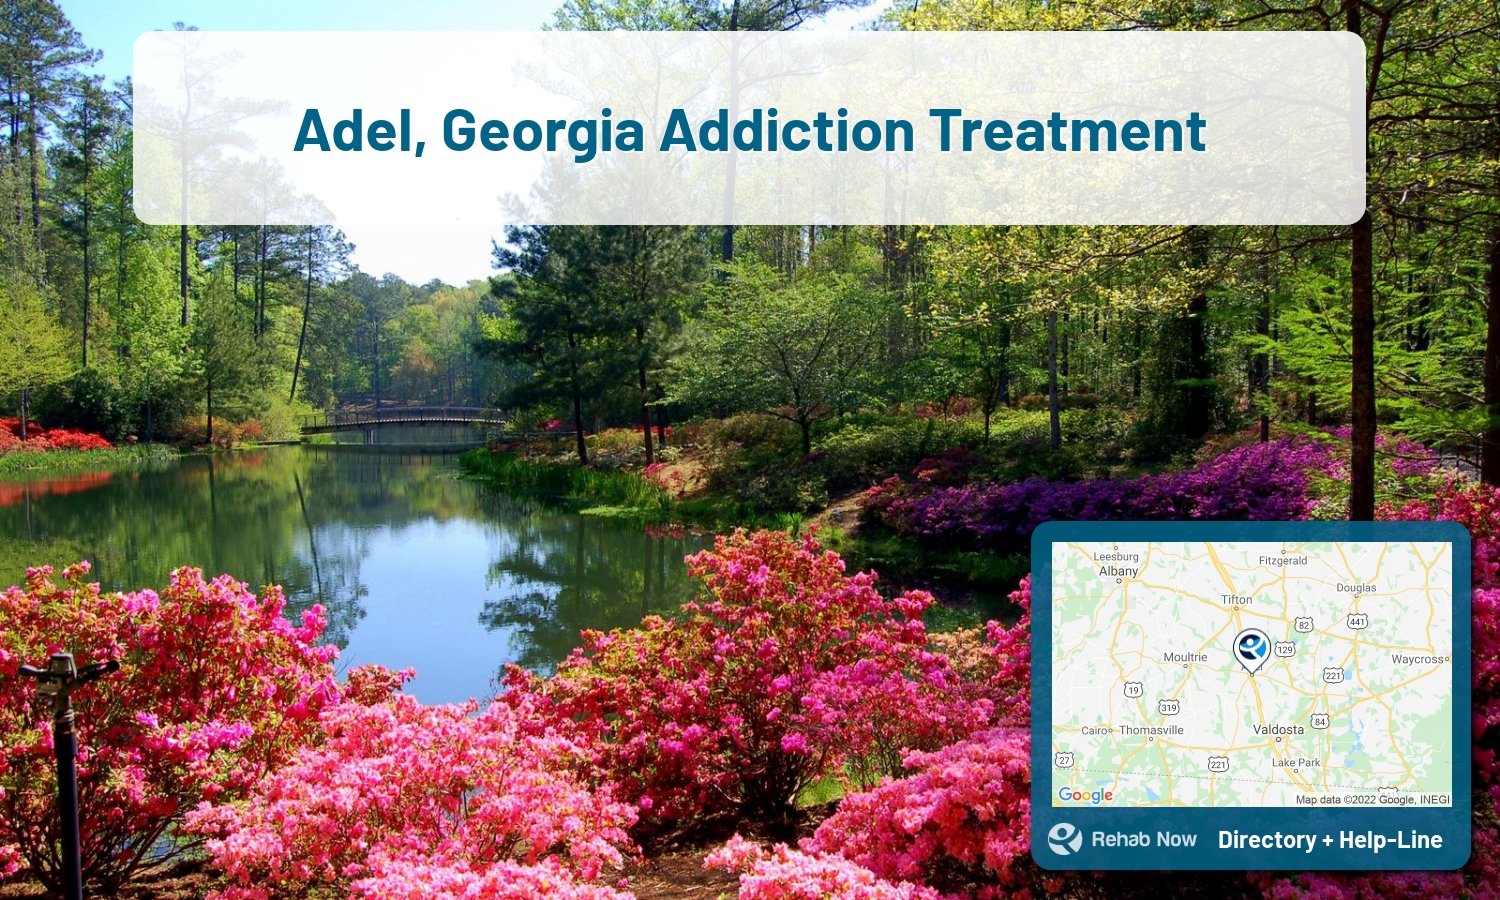 Drug rehab and alcohol treatment services nearby Adel, GA. Need help choosing a treatment program? Call our free hotline!